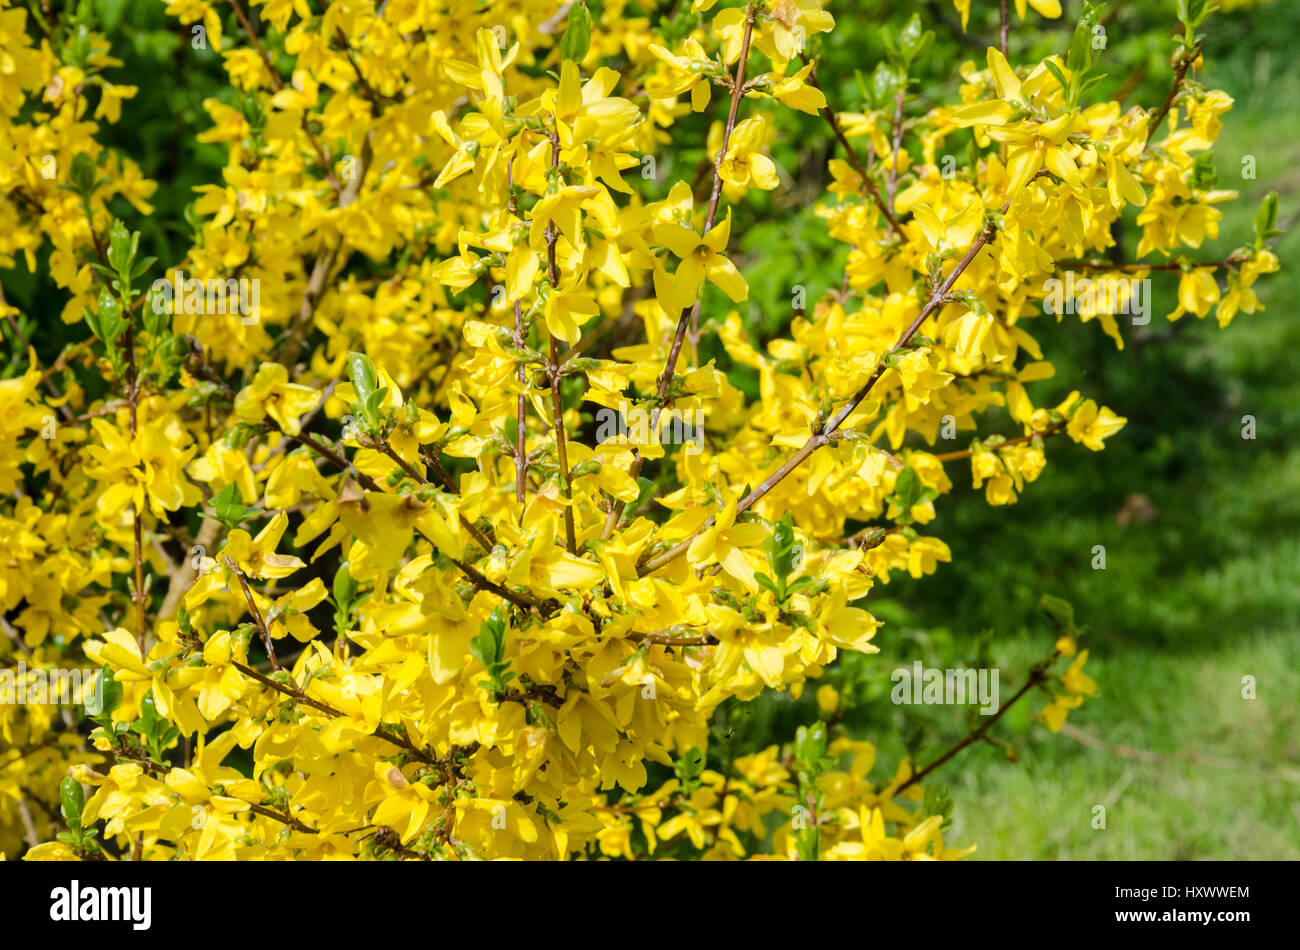 A forsythia shrub covered in yellow flowers. Stock Photo